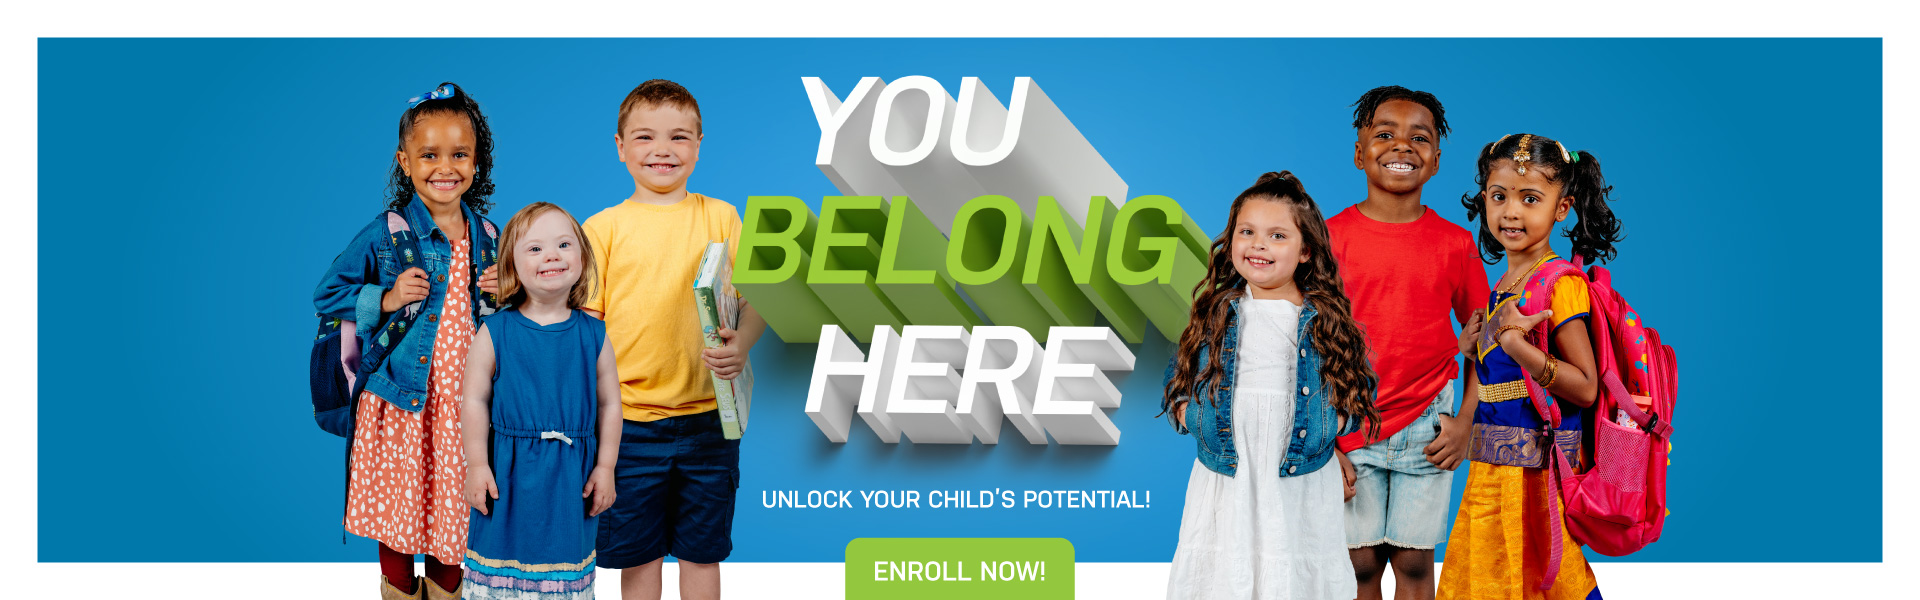 You Belong Here Unlock your child's potential! Enroll Now!